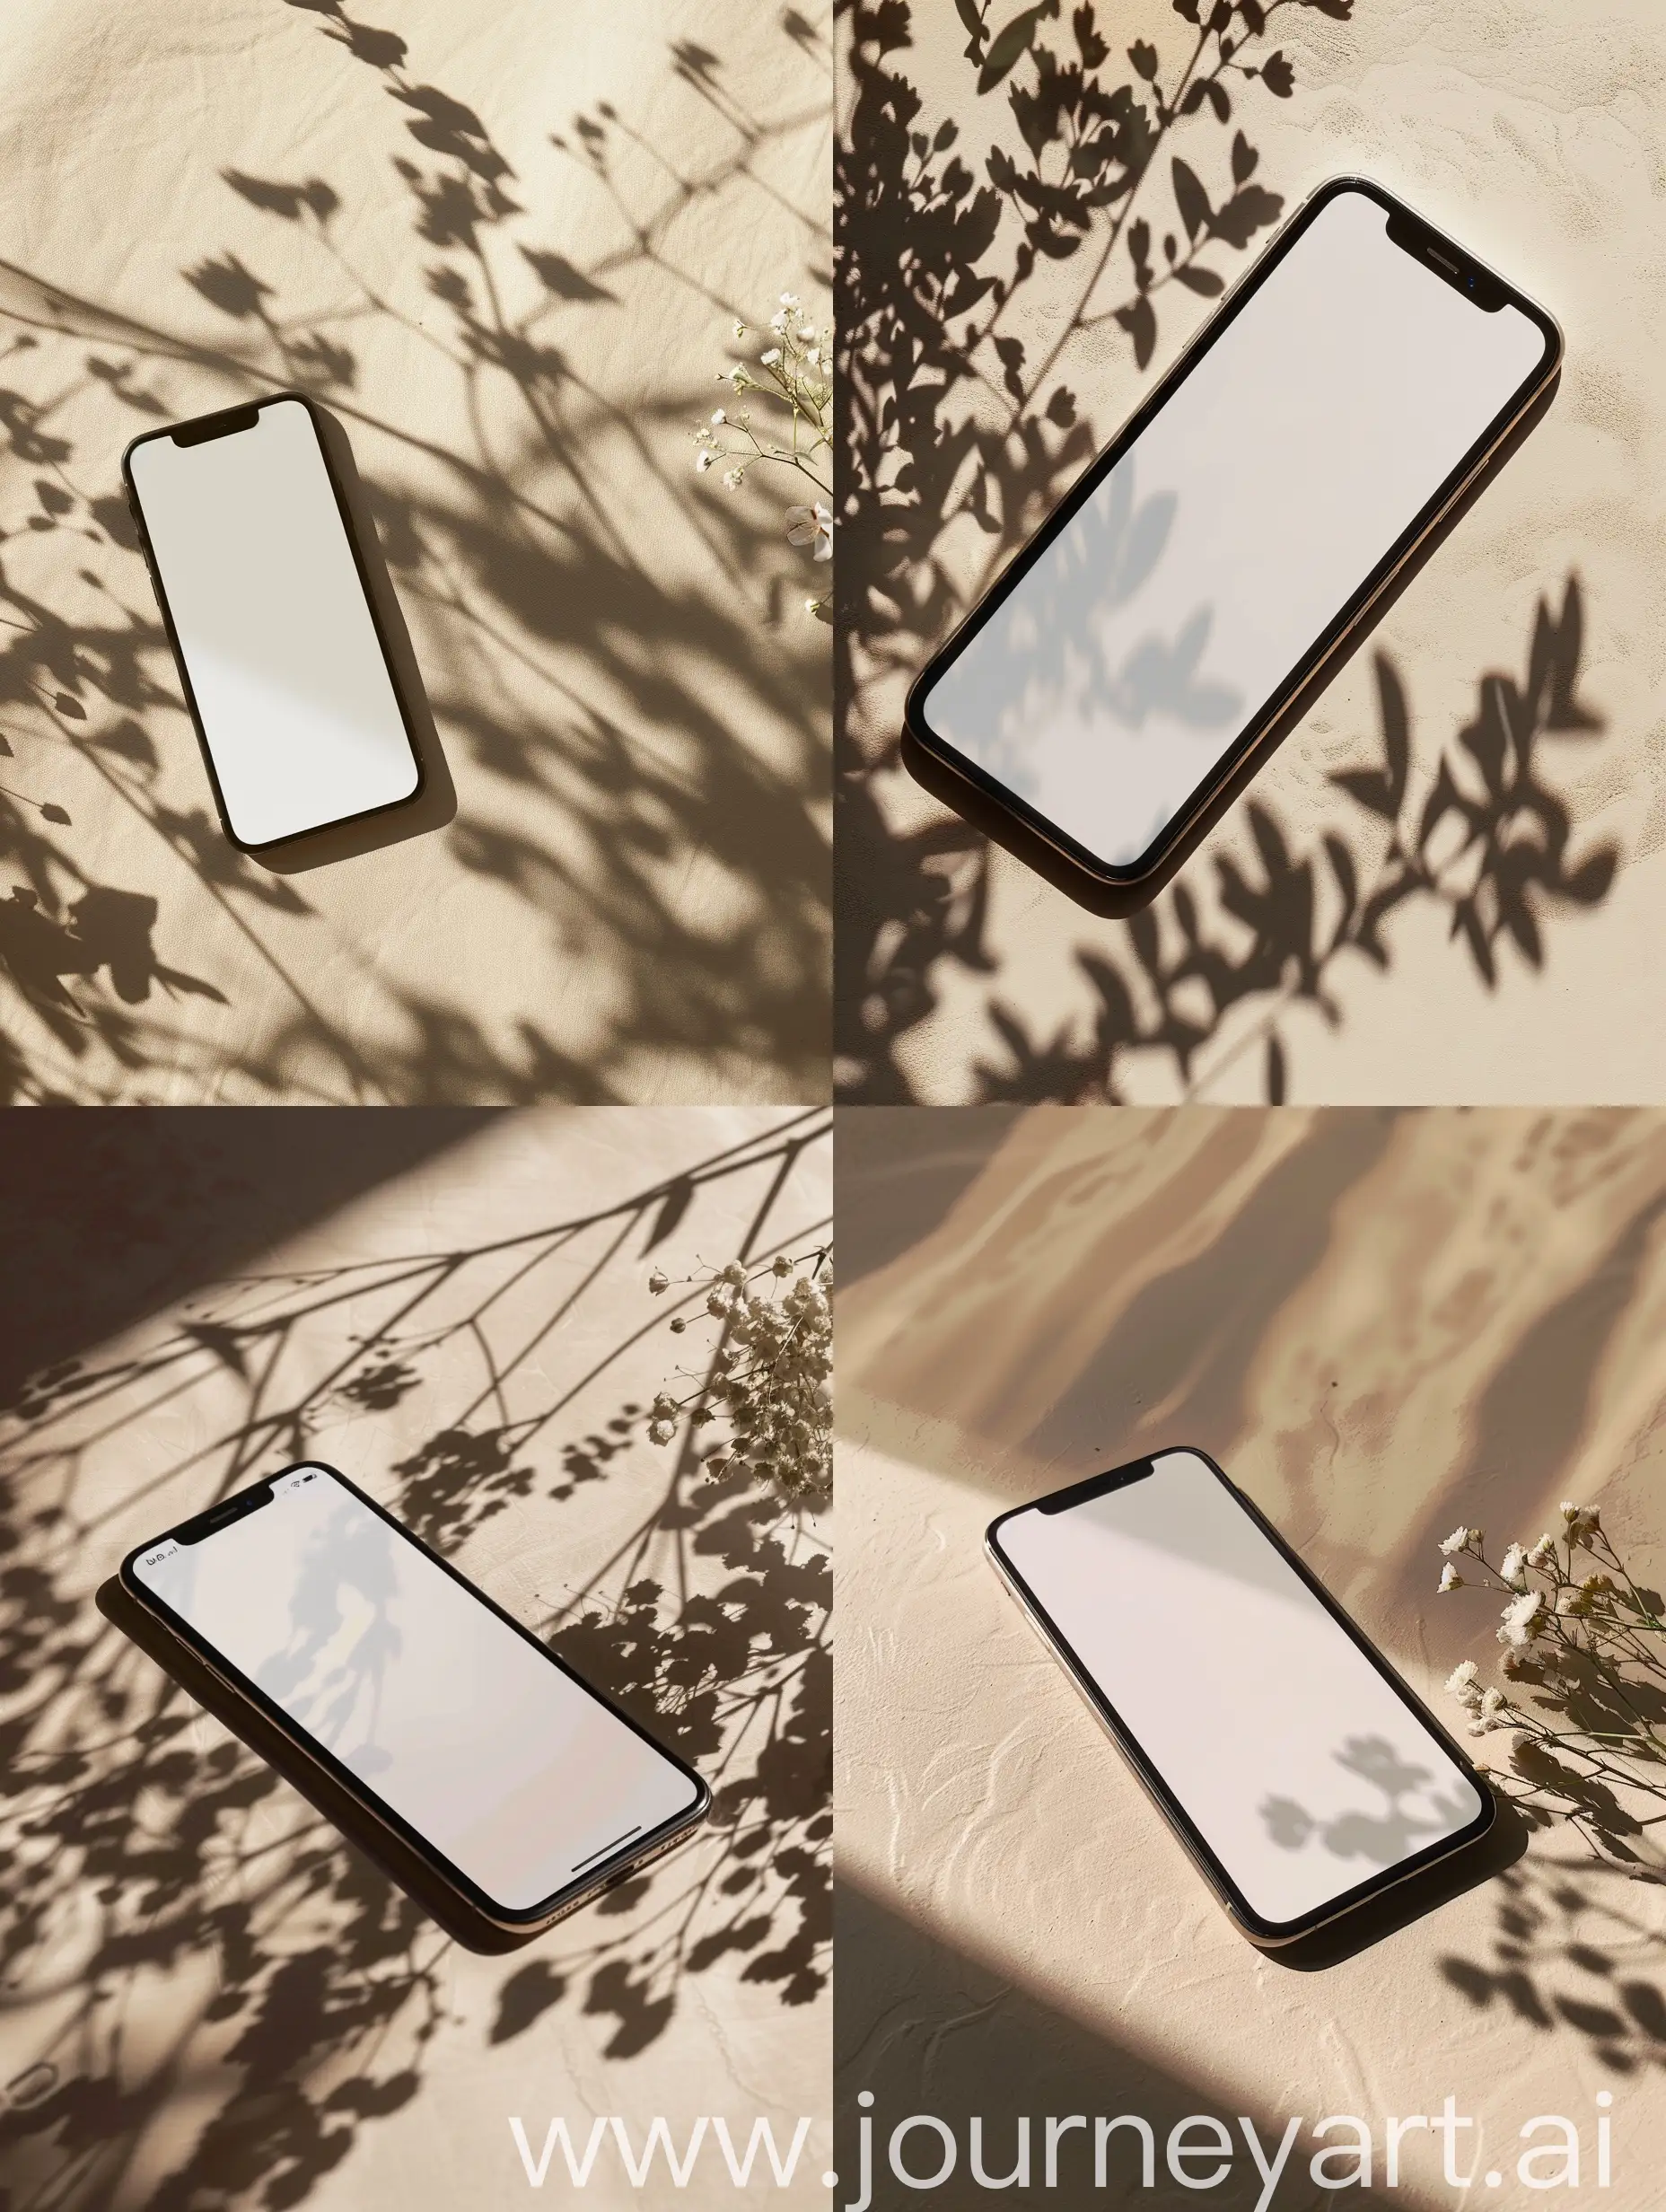 iphone with completely white screen laying on biege table with shadow of flowers